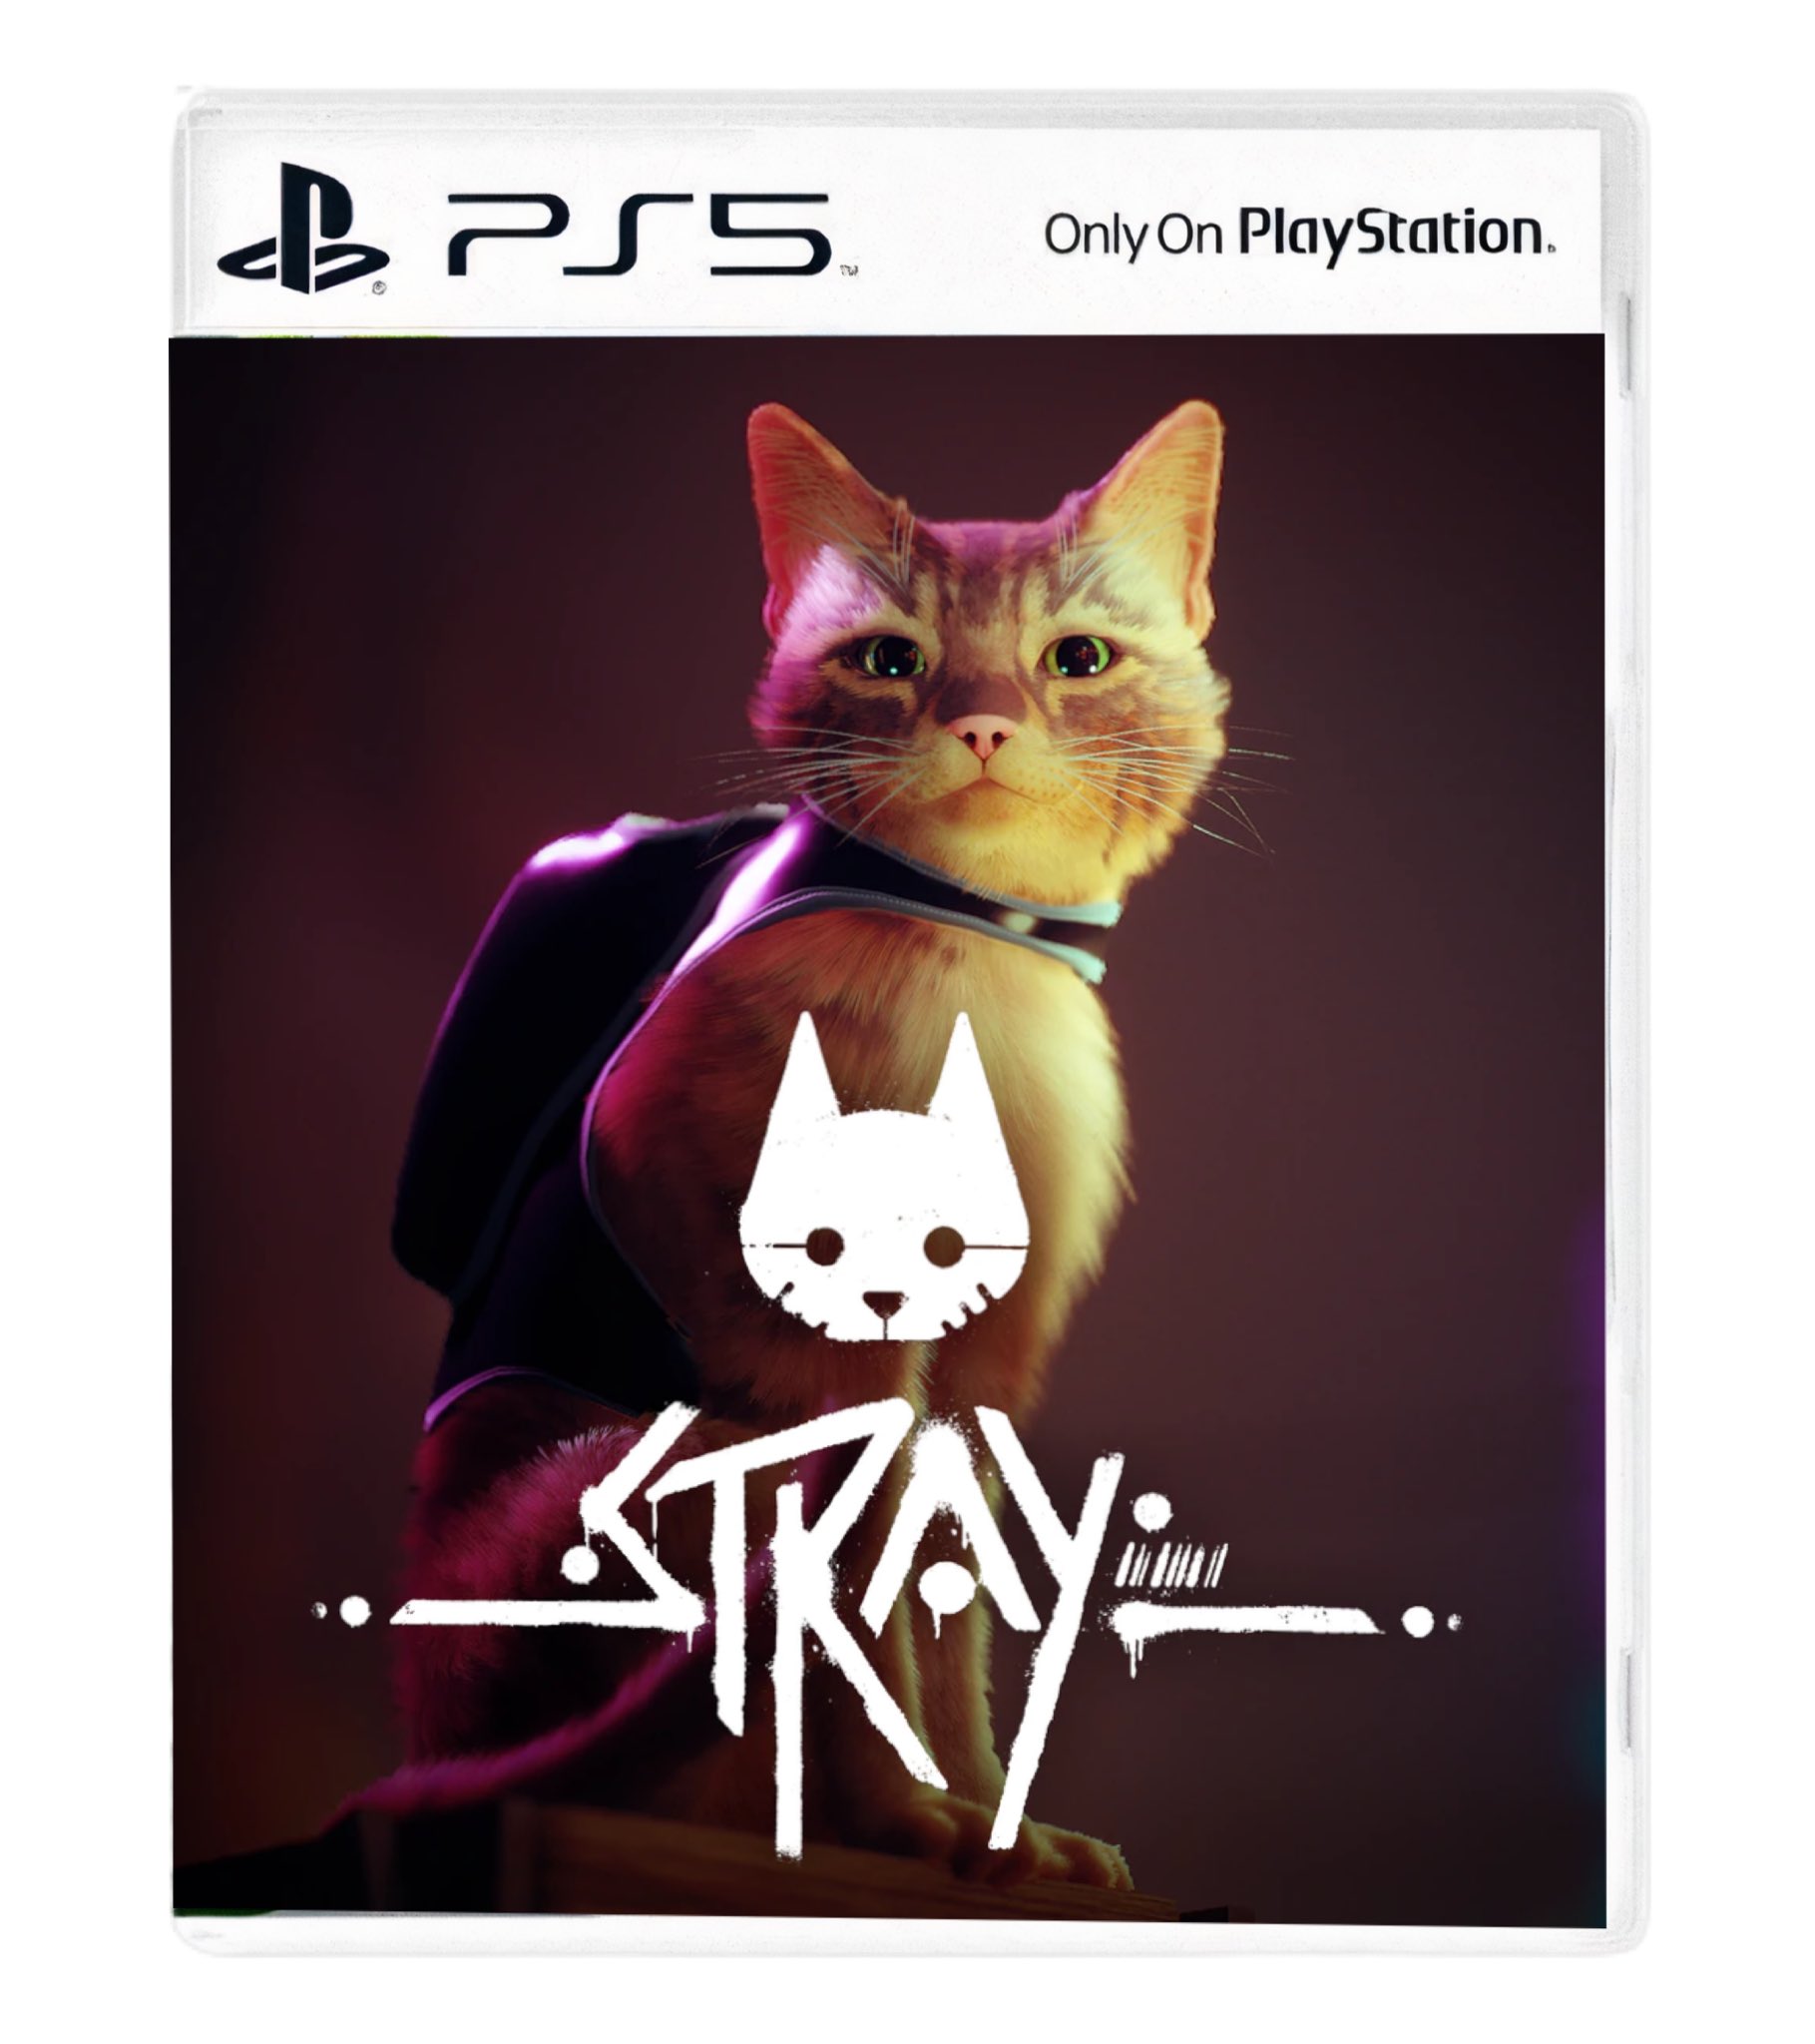 TCMFGames on X: I need to see more of Stray